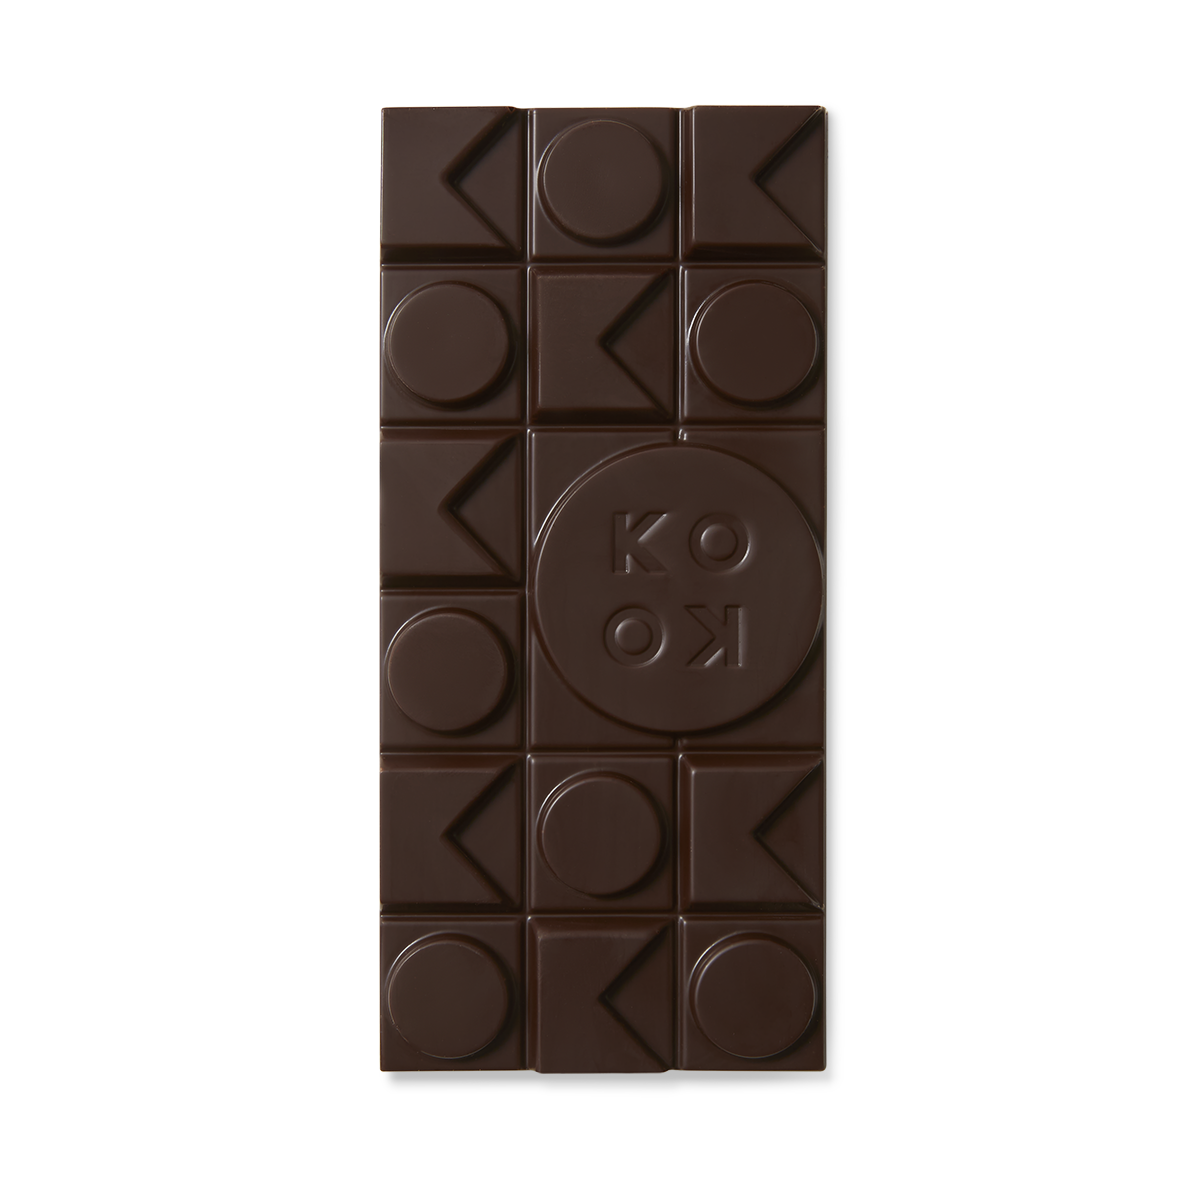 Exposed chocolate block with art deco shaped pieces